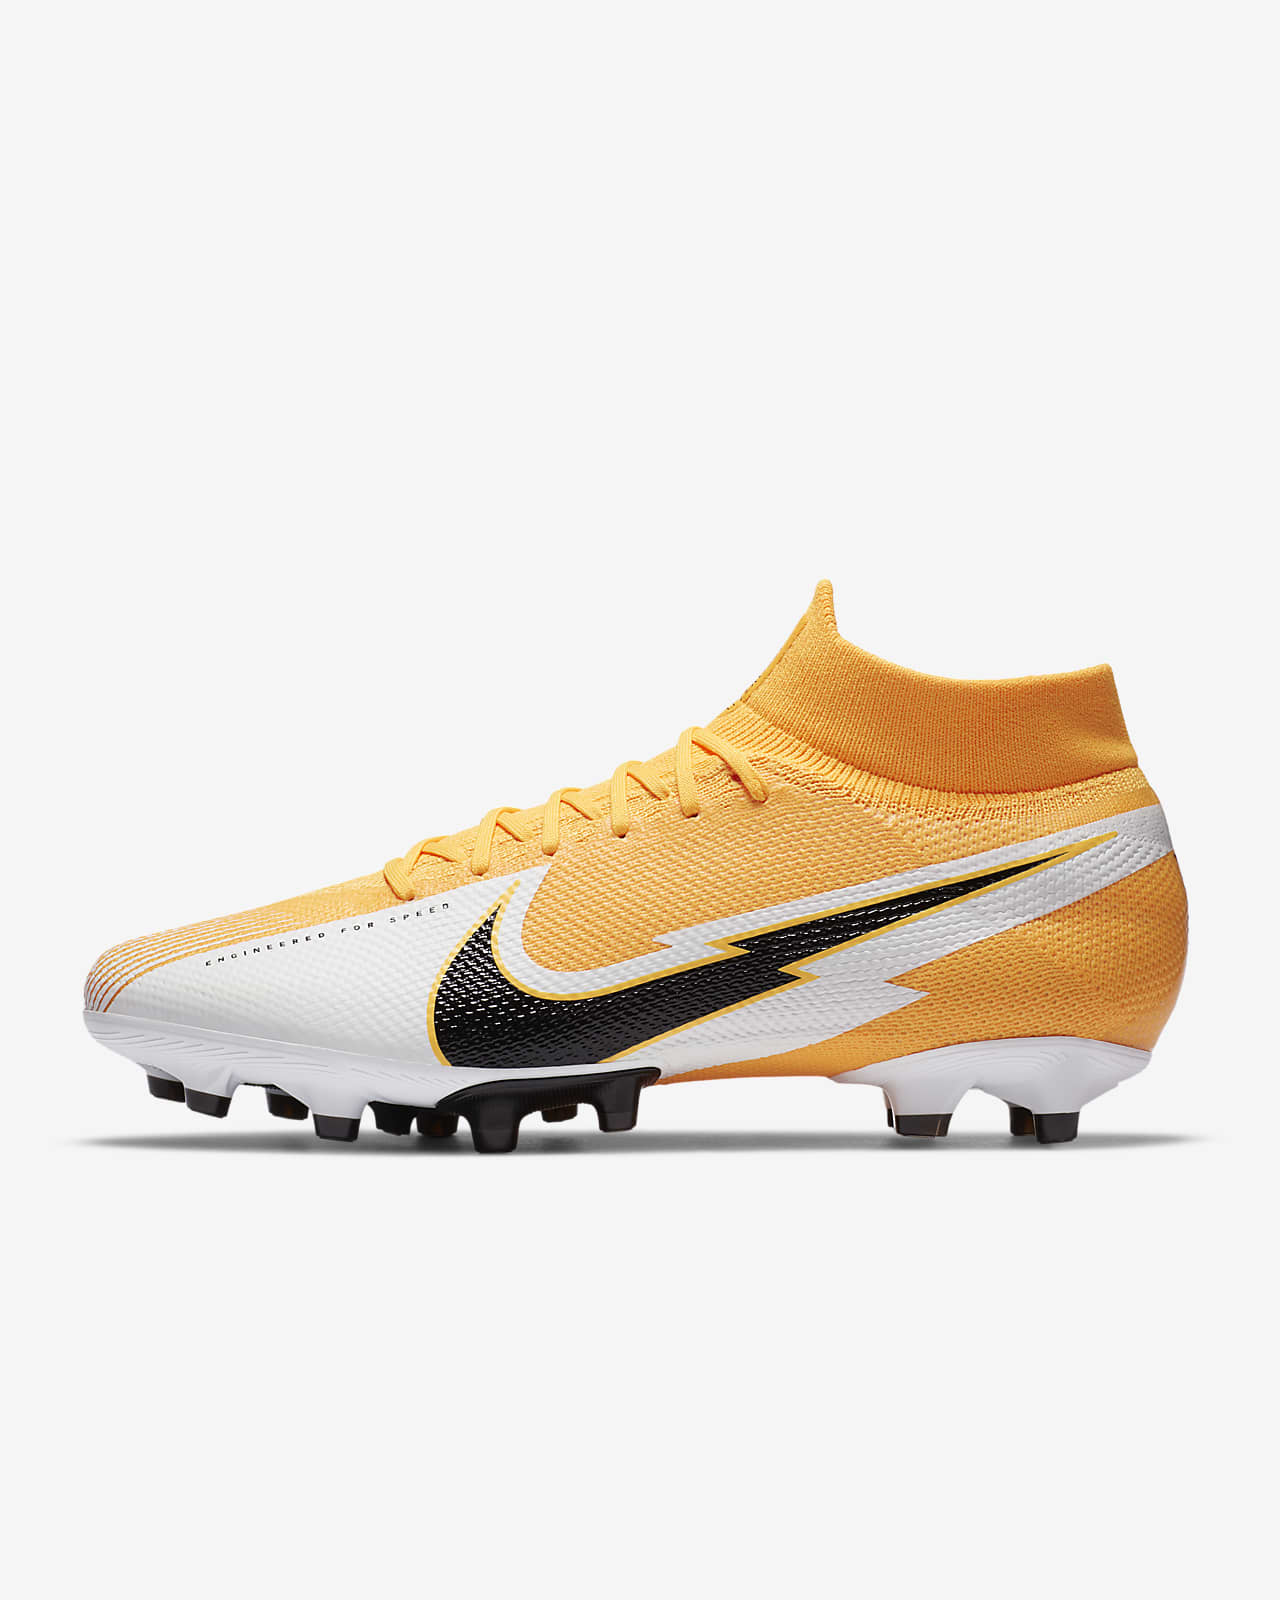 Nike Mercurial Superfly 7 Pro AG-PRO 